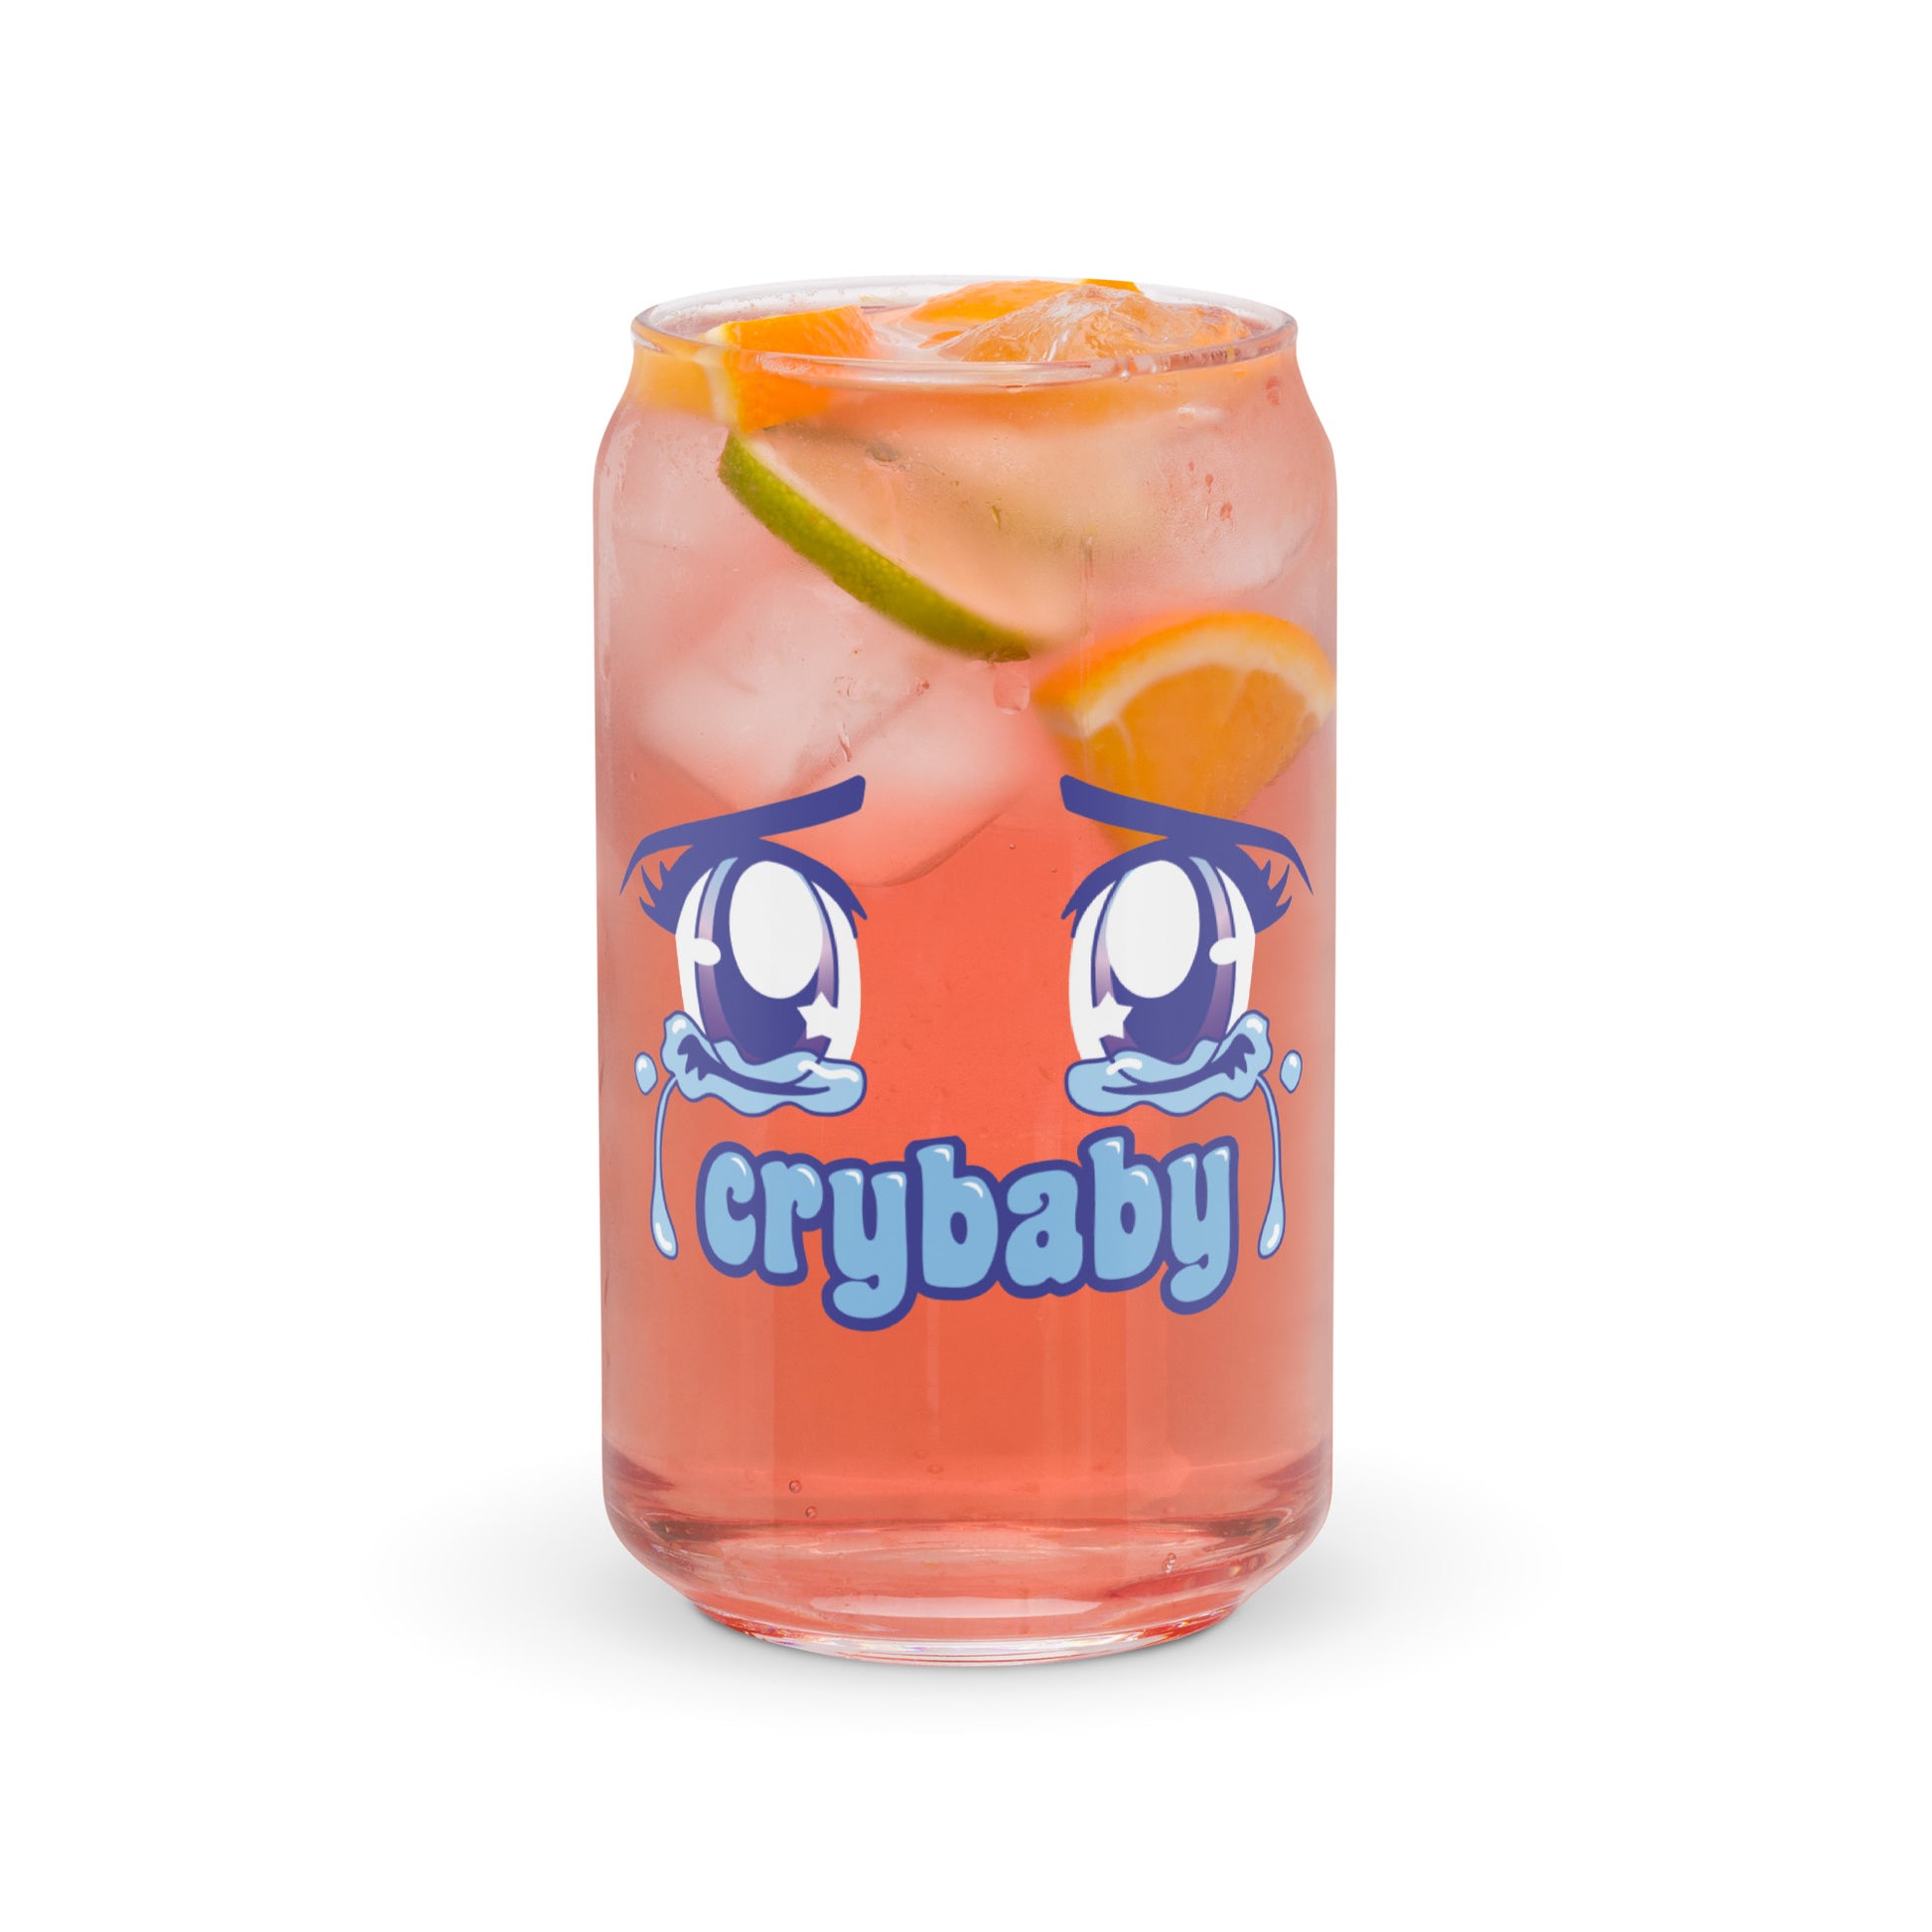 A 16 ounce can-shaped glass featuring an illustration of large, sparkling purple anime eyes with tears streaming down. Text underneath the eyes reads "Crybaby" in a rounded blue font. The glass is full of a pink beverage with slices of fruit and ice.